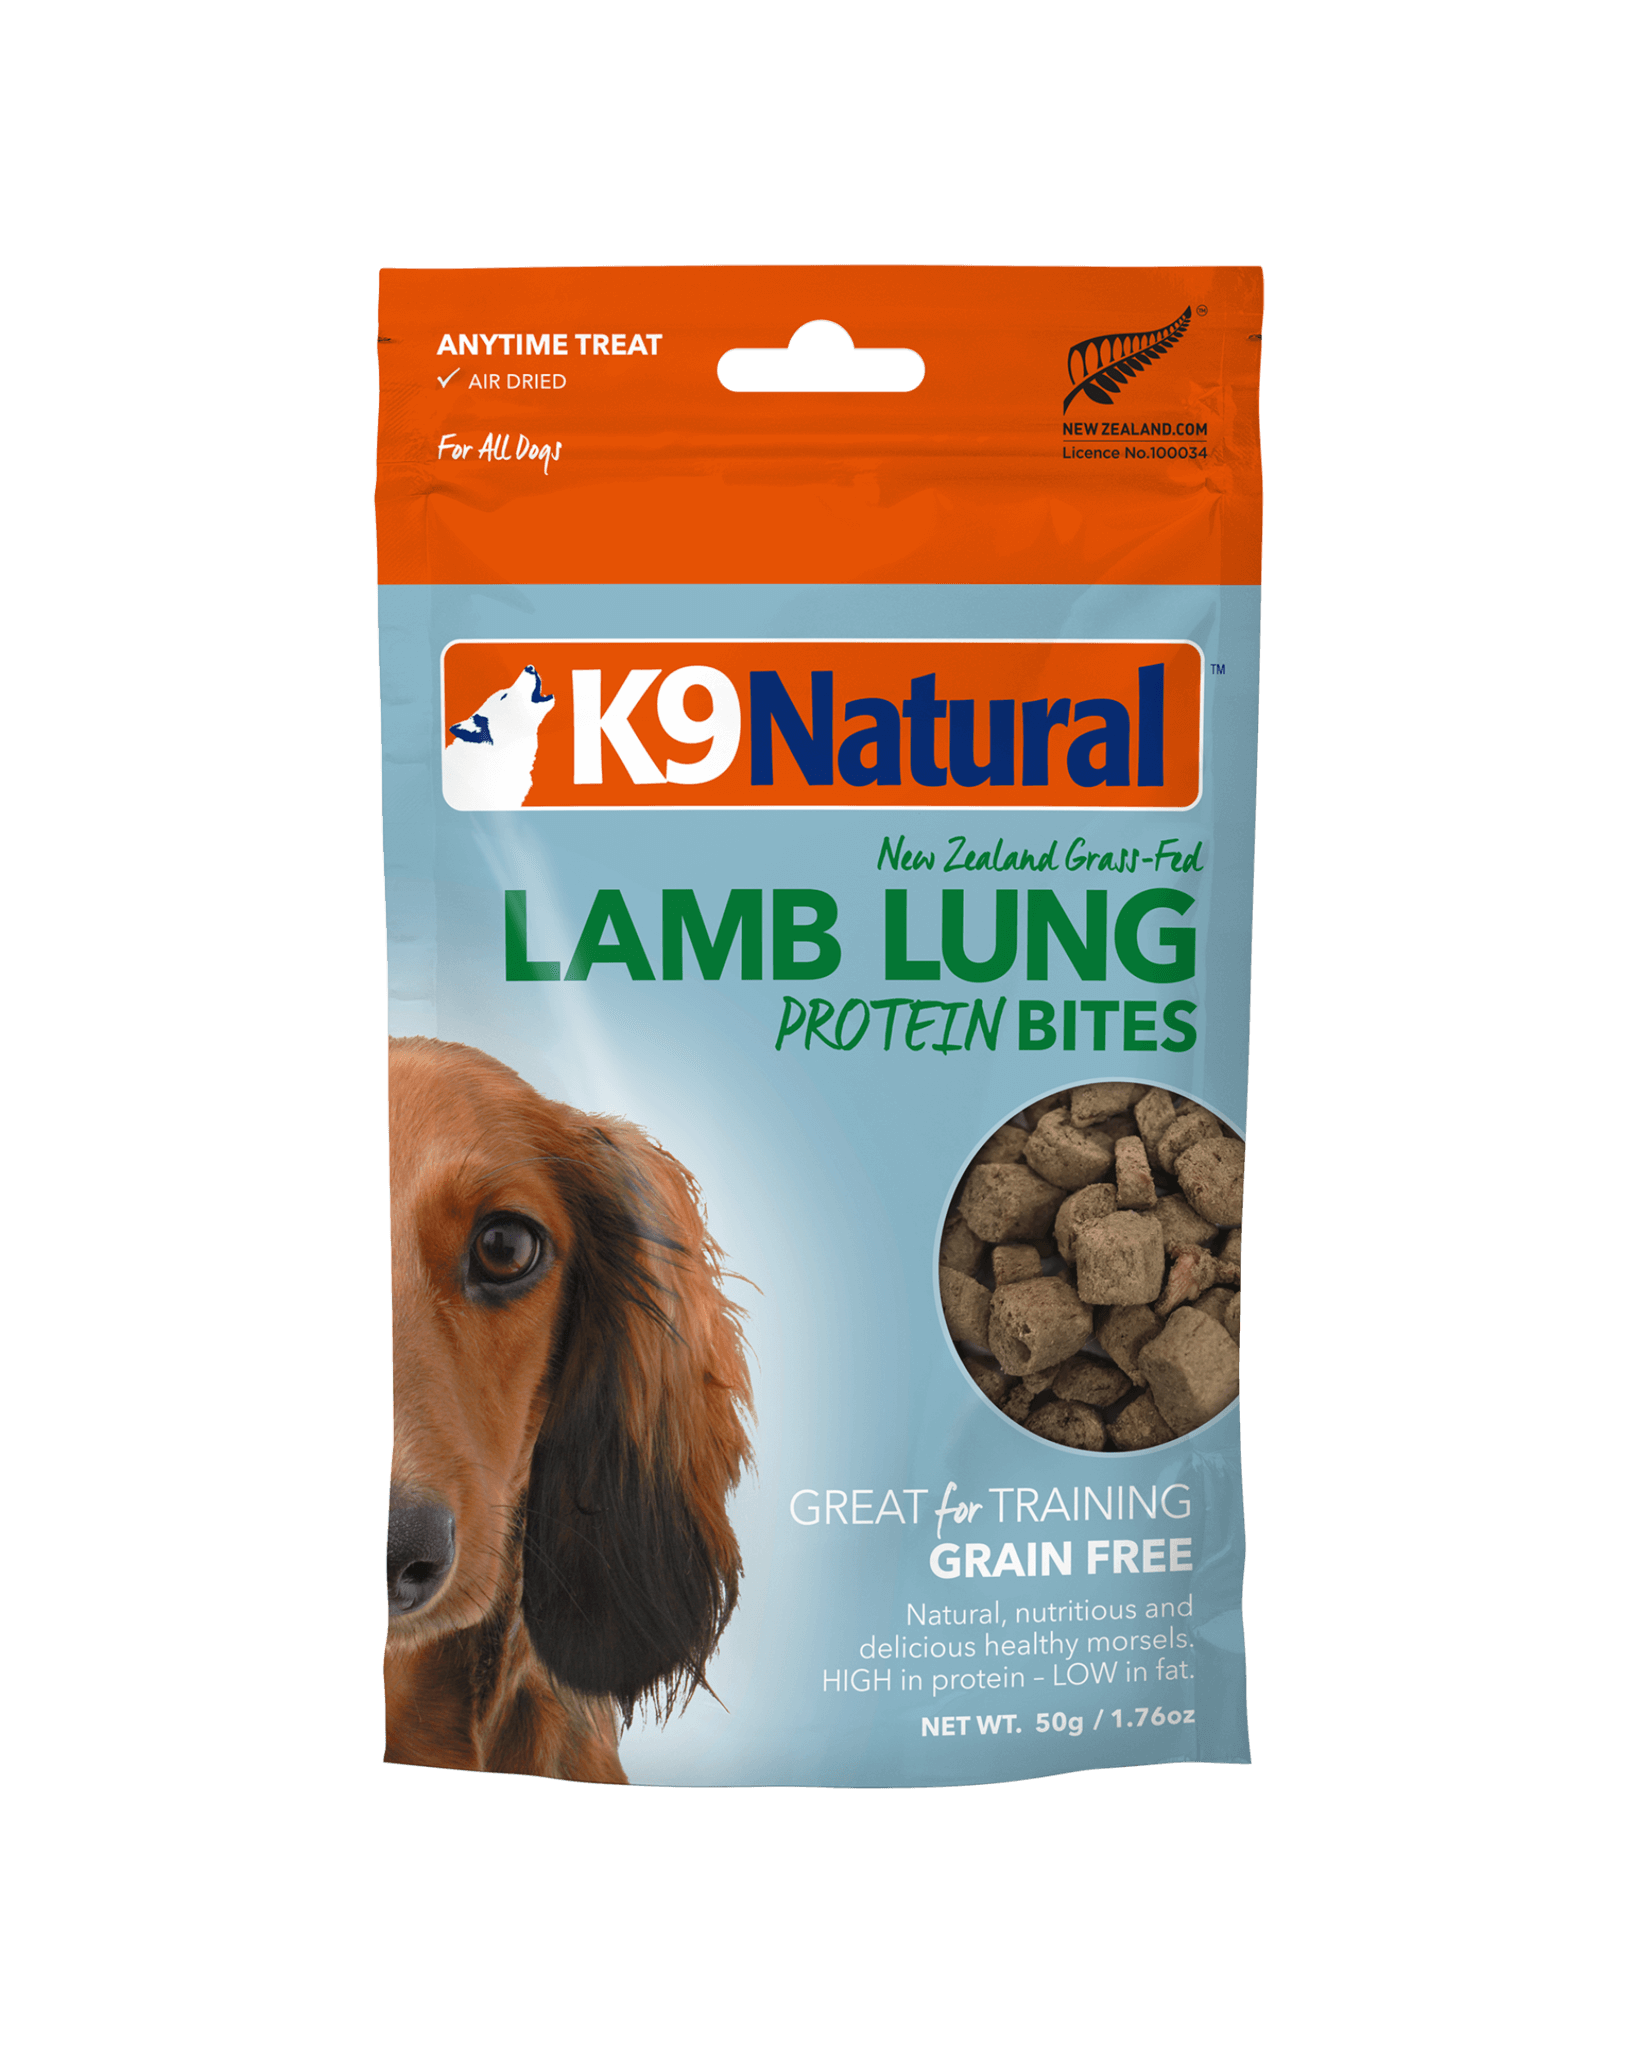 K9 Natural - Air Dried Lamb Lung Protein Bites